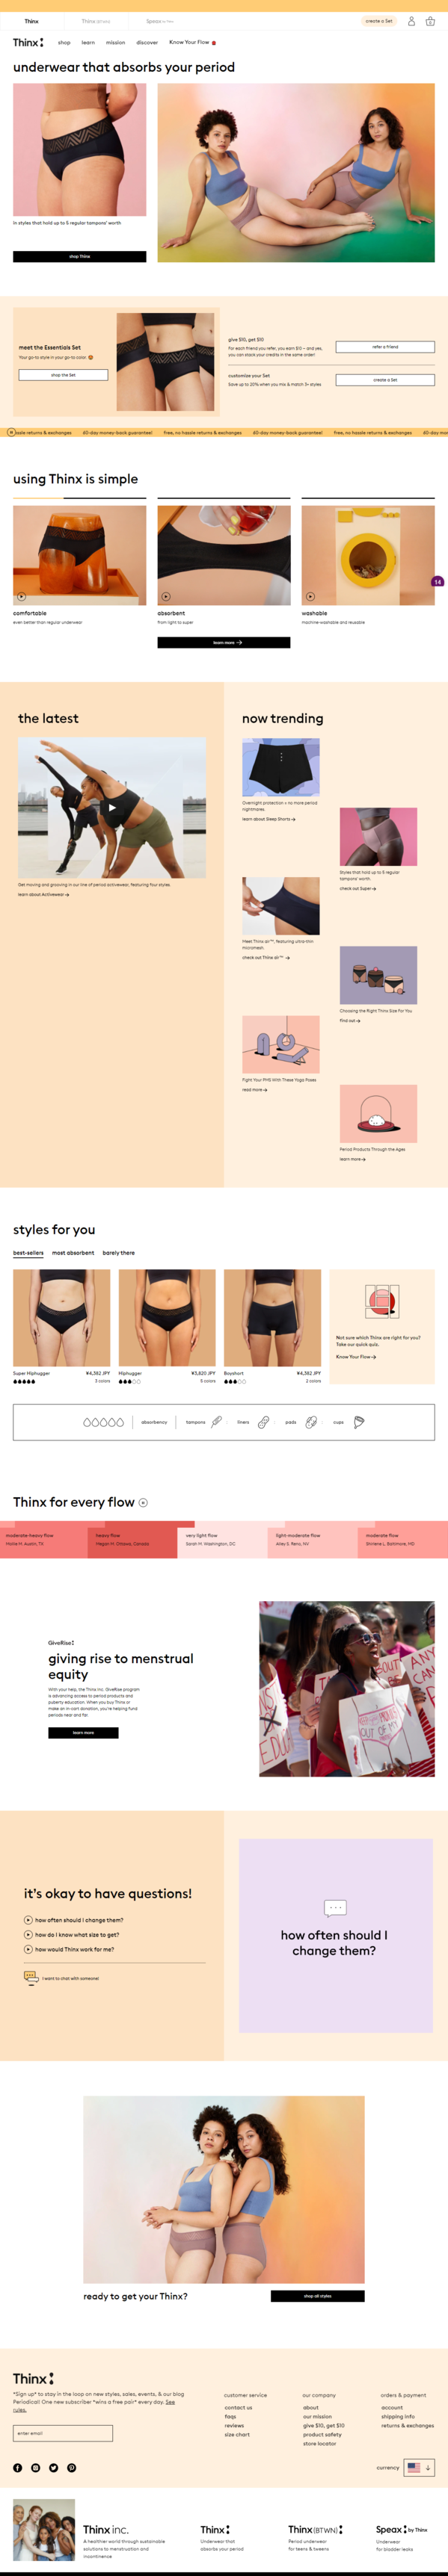 Thinx - For People with Periods - www.shethinx.com.png